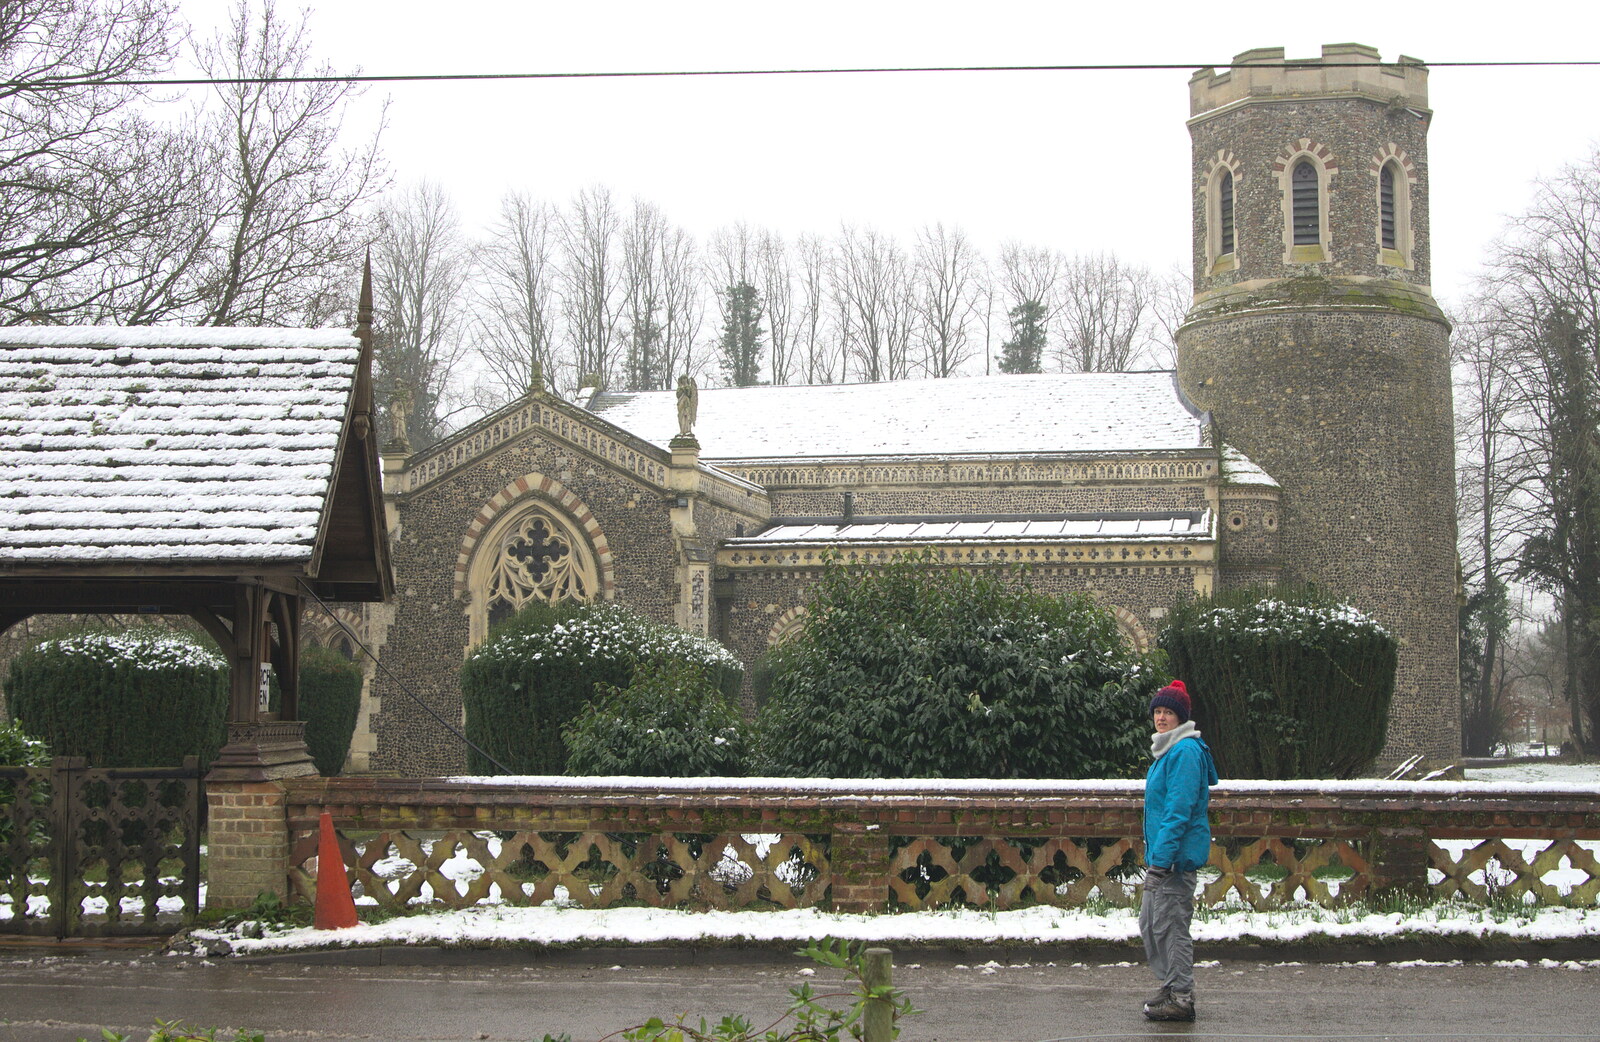 Isobel outside Brome church from A Snowy Day, Brome, Suffolk - 12th February 2017